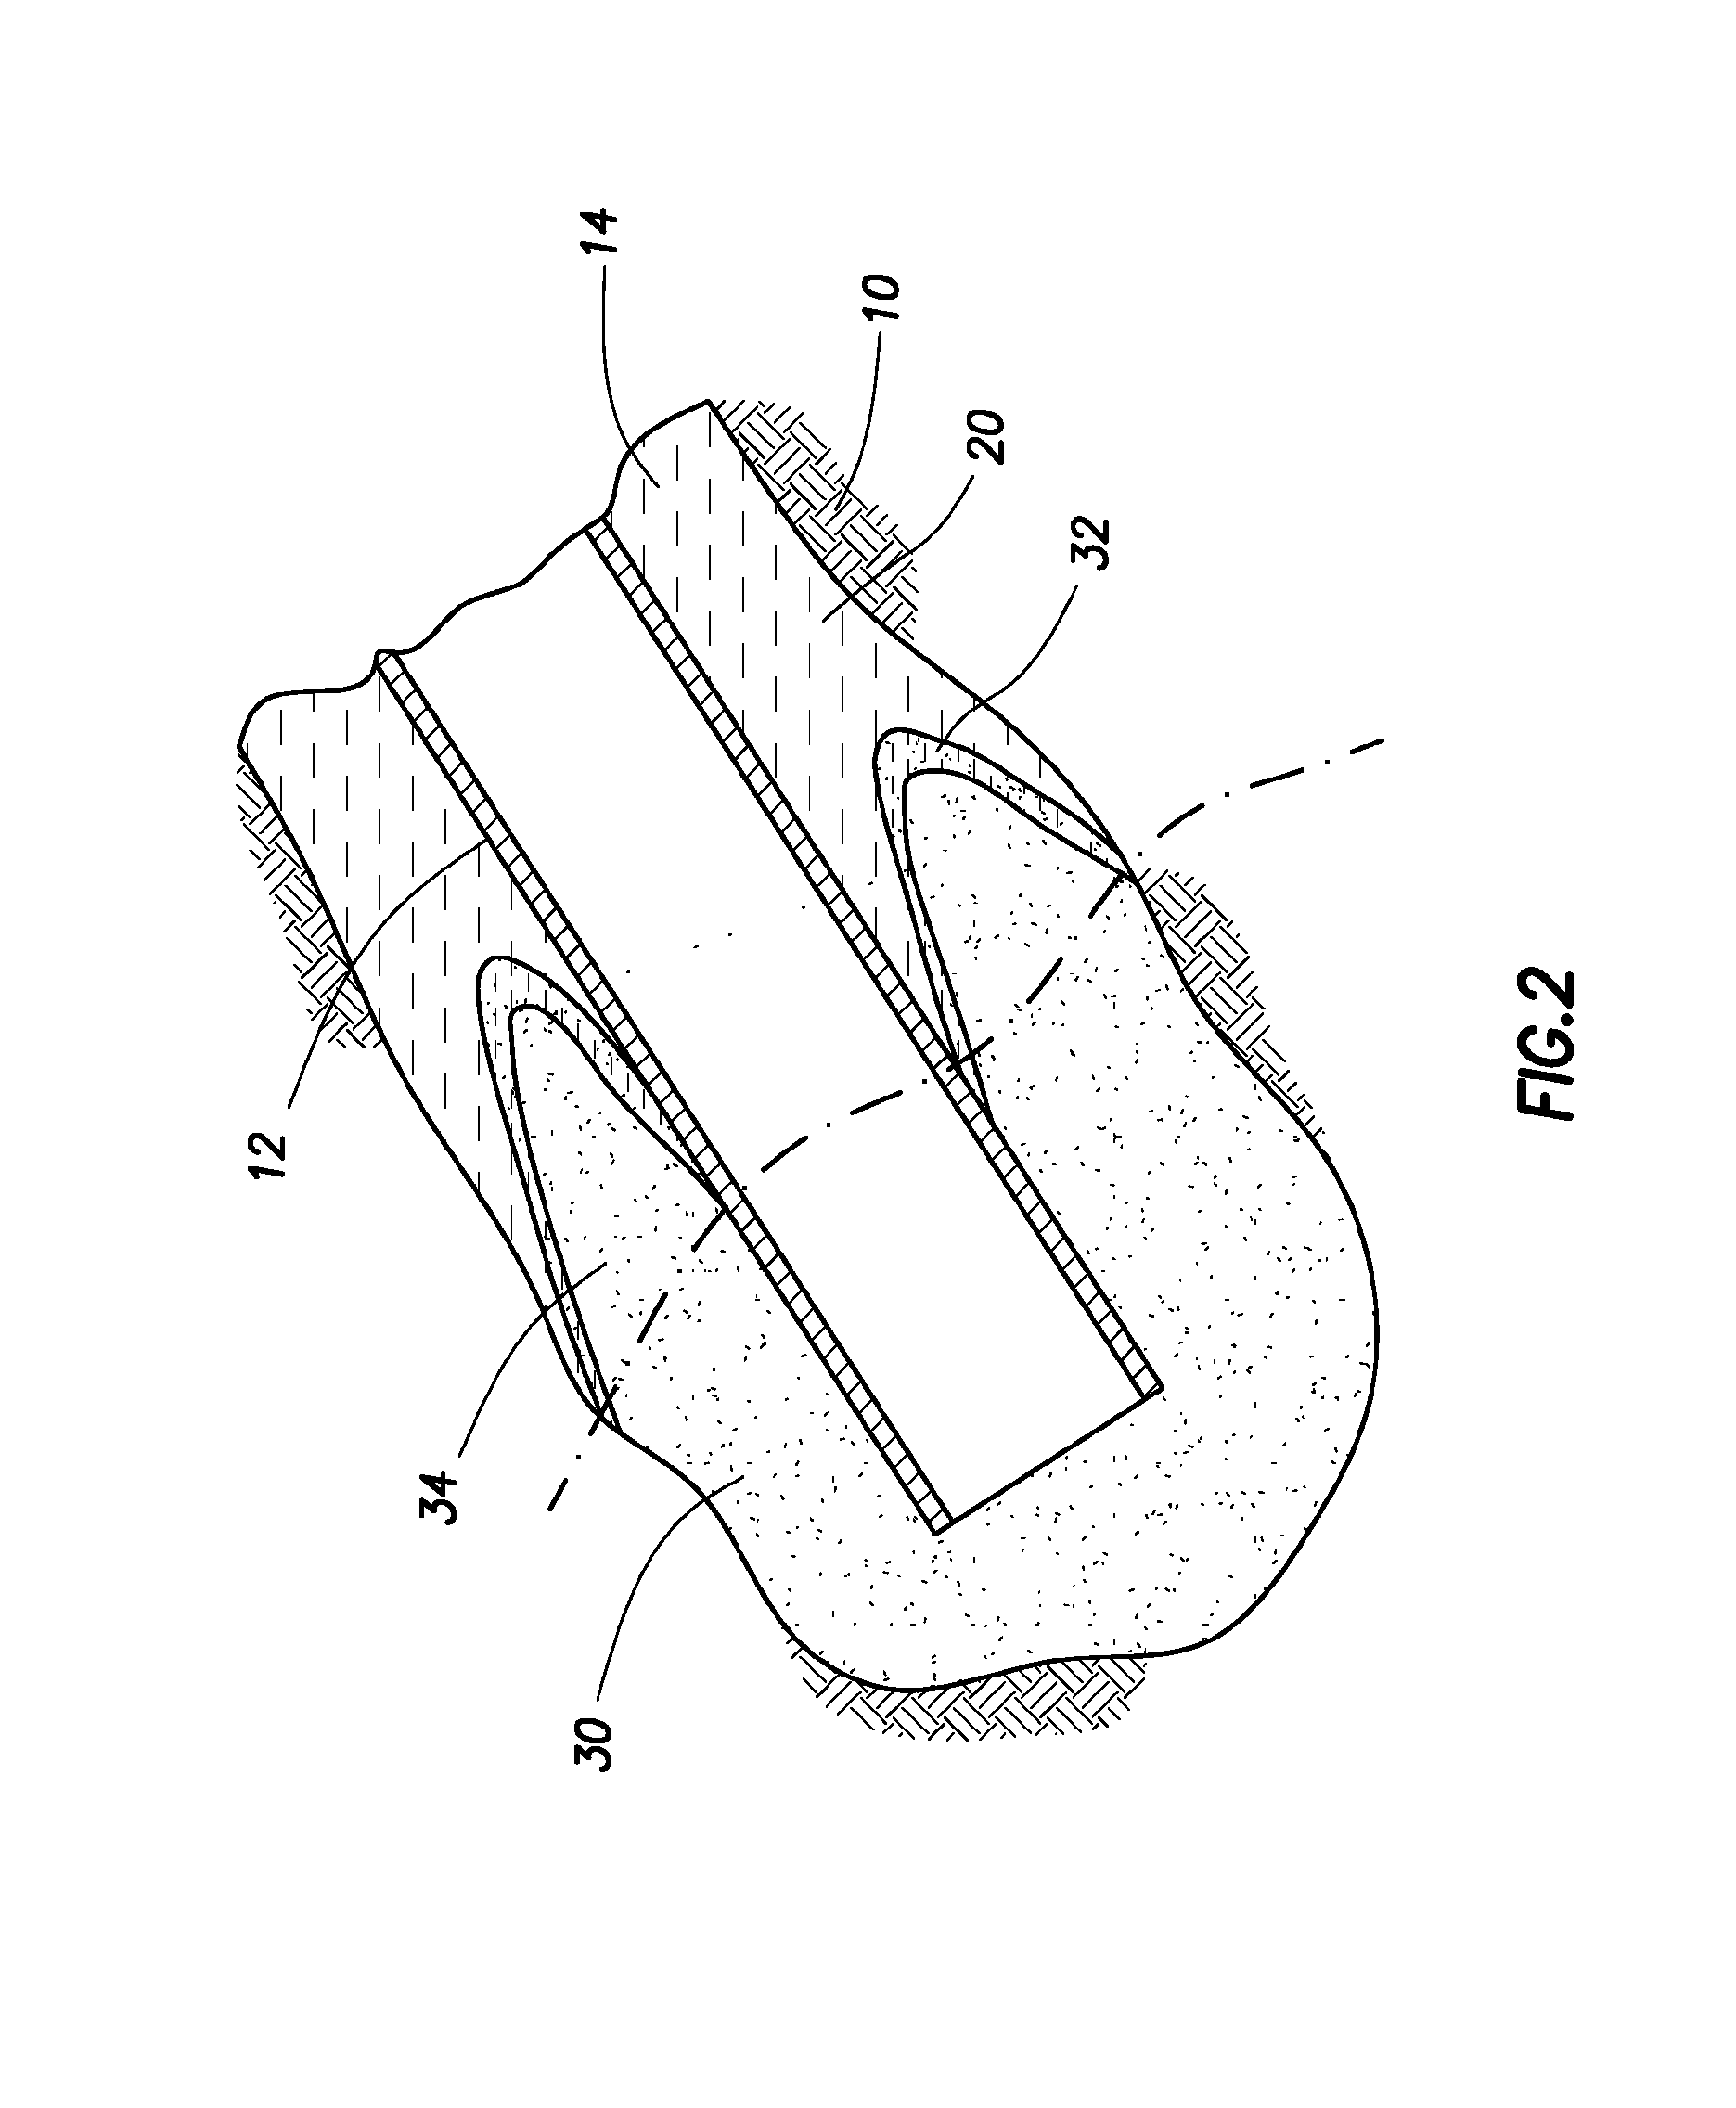 Apparatus and methods for determining surface wetting of material under subterranean wellbore conditions